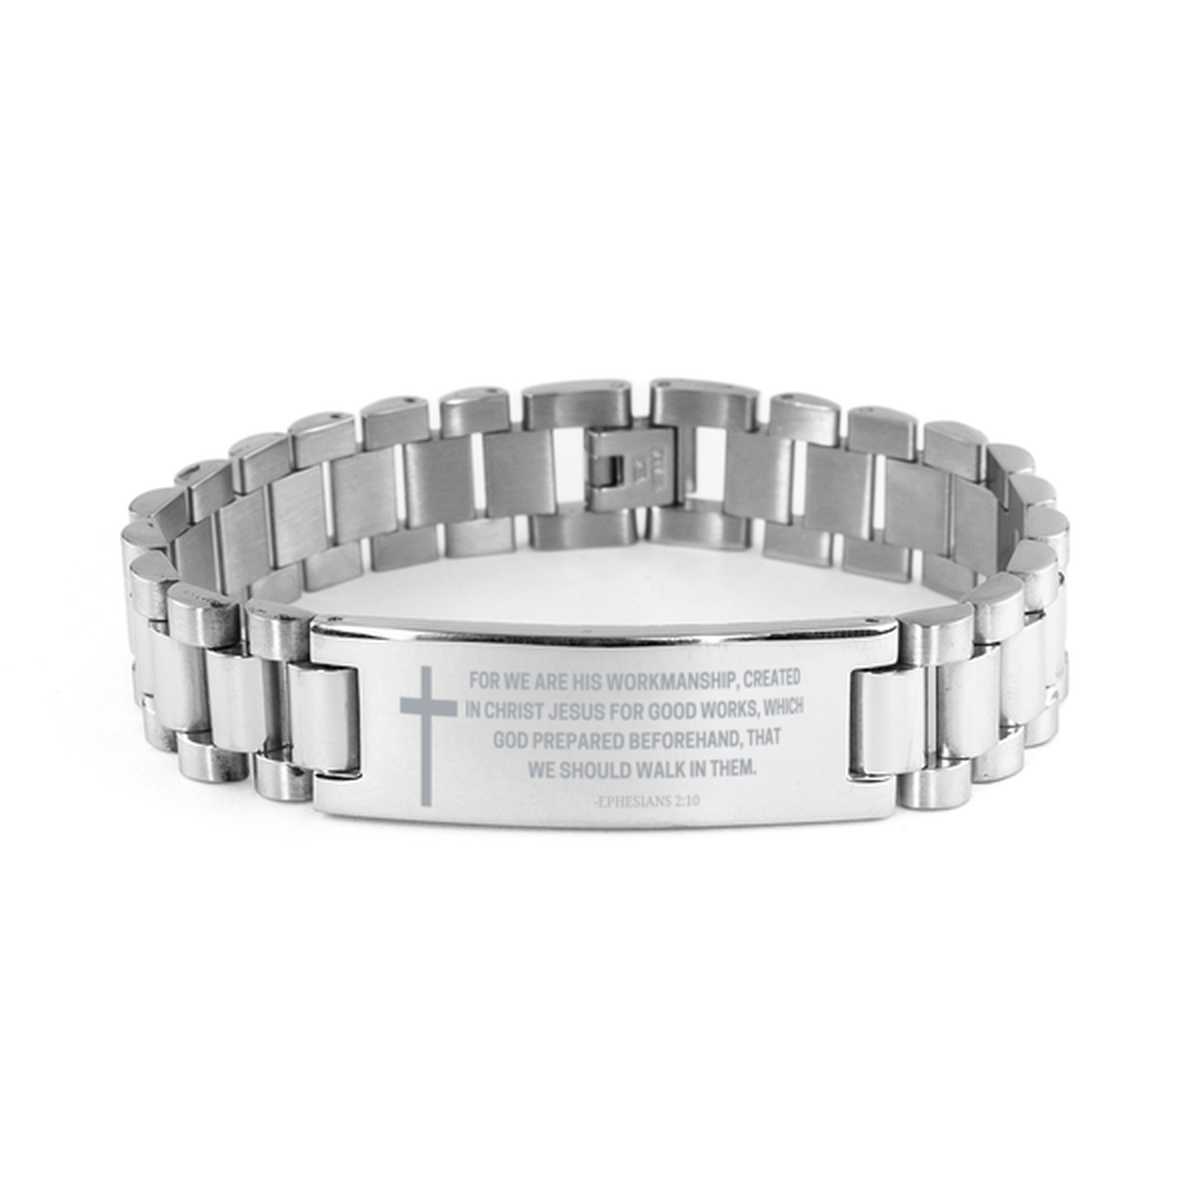 Baptism Gifts For Teenage Boys Girls, Christian Bible Verse Ladder Stainless Steel Bracelet, For we are His workmanship, Catholic Confirmation Gifts for Son, Godson, Grandson, Nephew